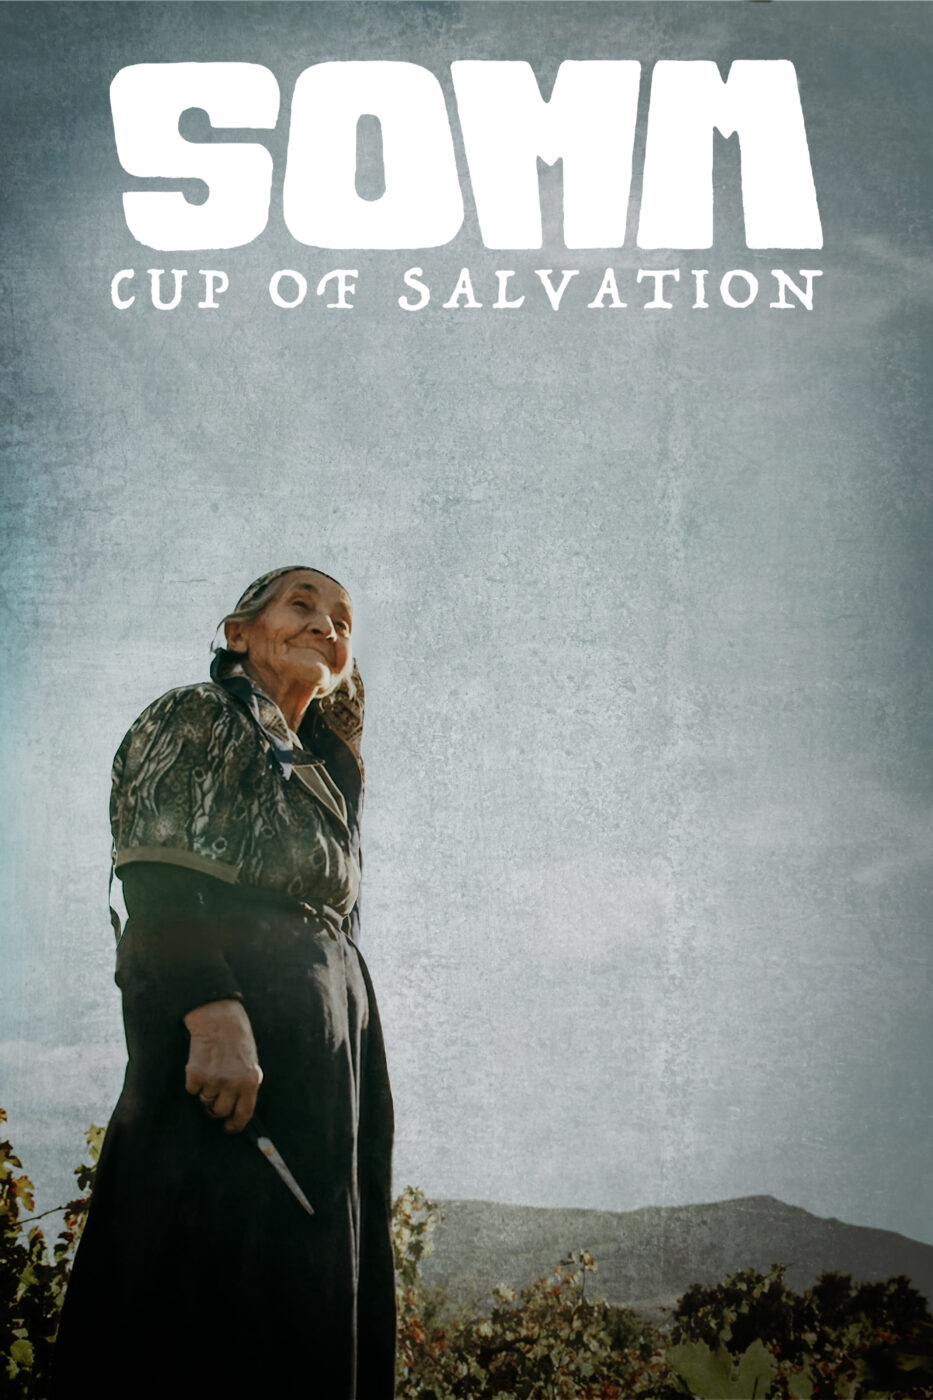 An elderly woman in a shawl smiling up at the sky with a vineyard landscape in the background. The text reads SOMM: Cup of Salvation.